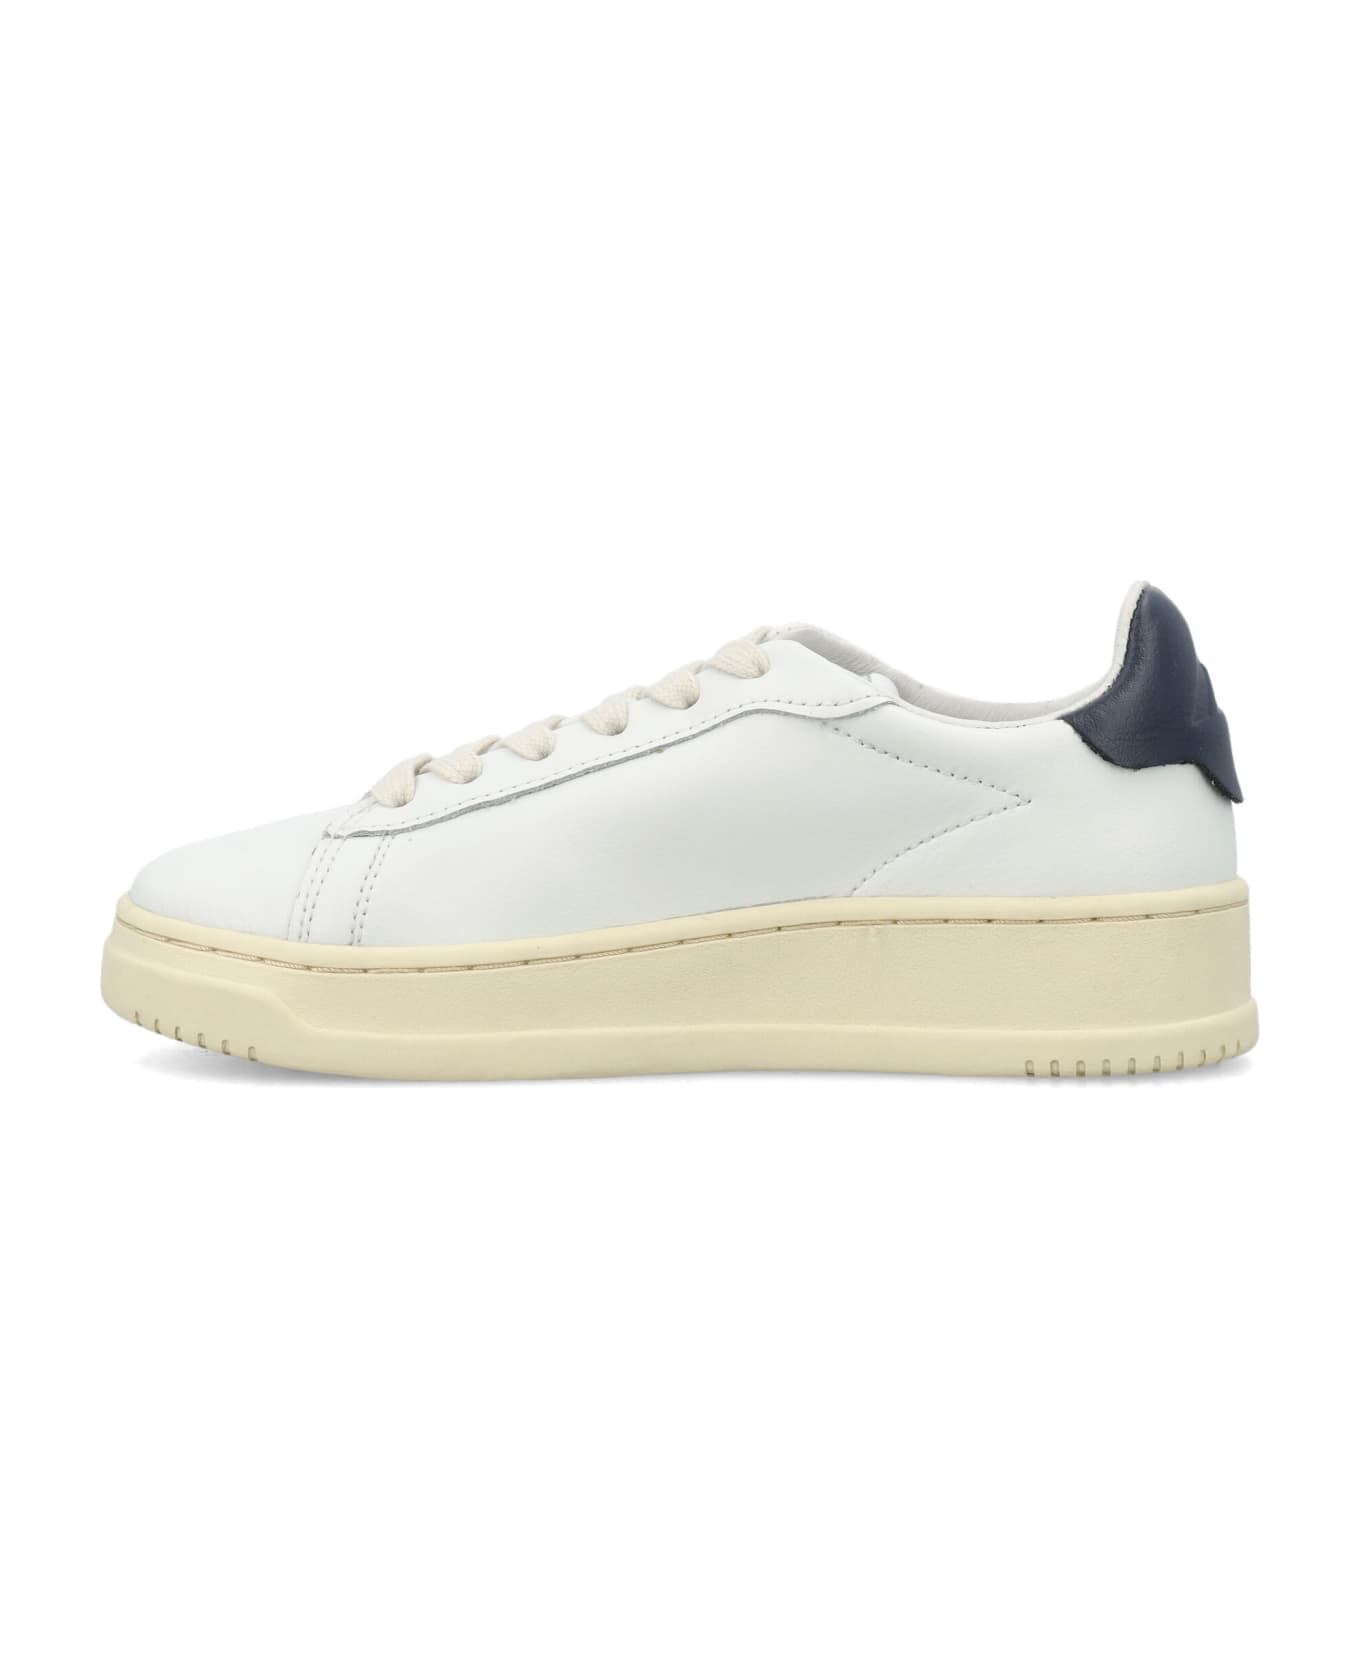 Autry Dallas Low Sneakers - WHITE/BLUE